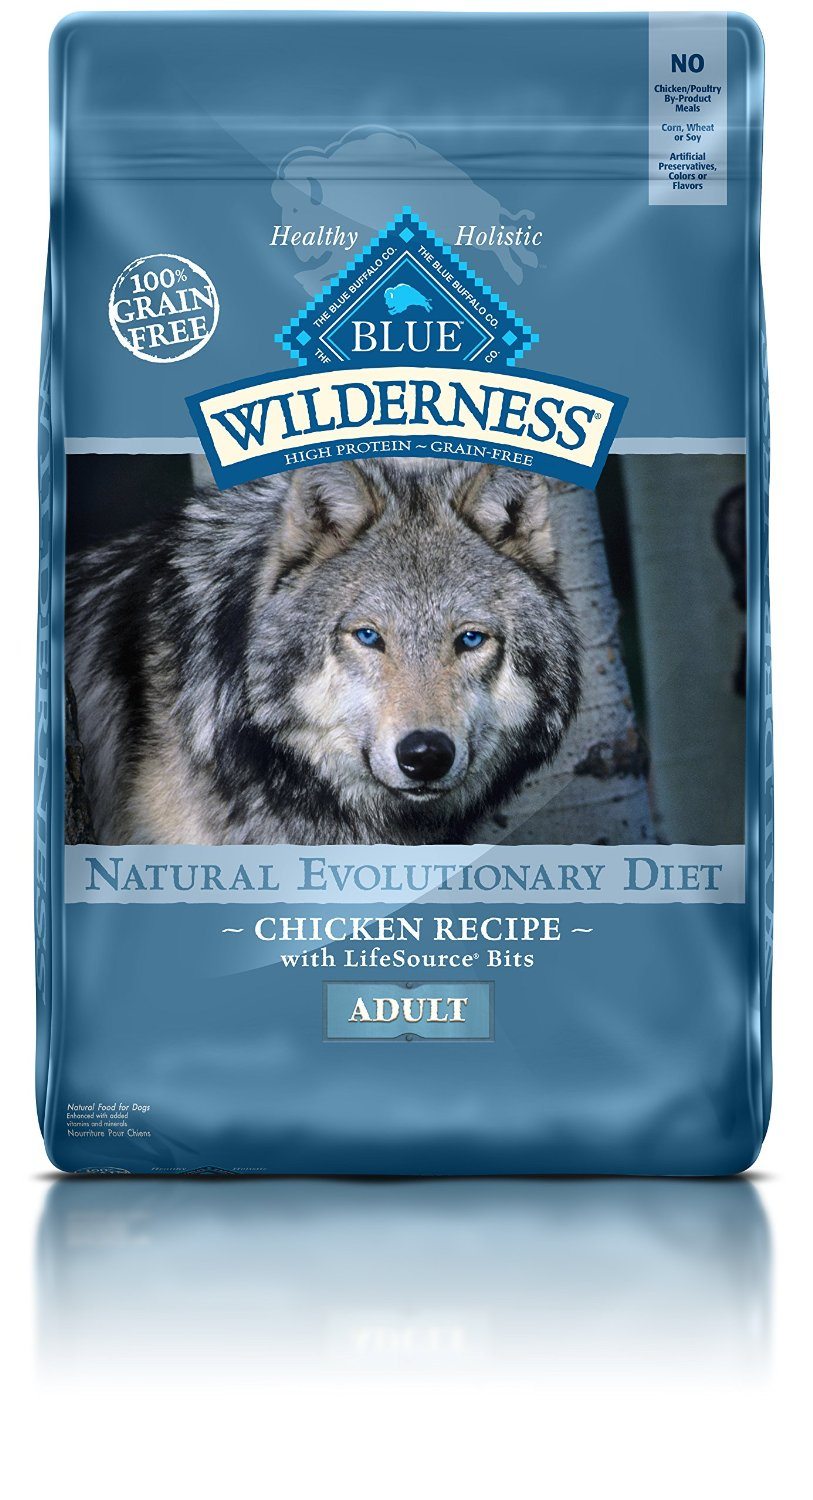 Recommended Dog Food